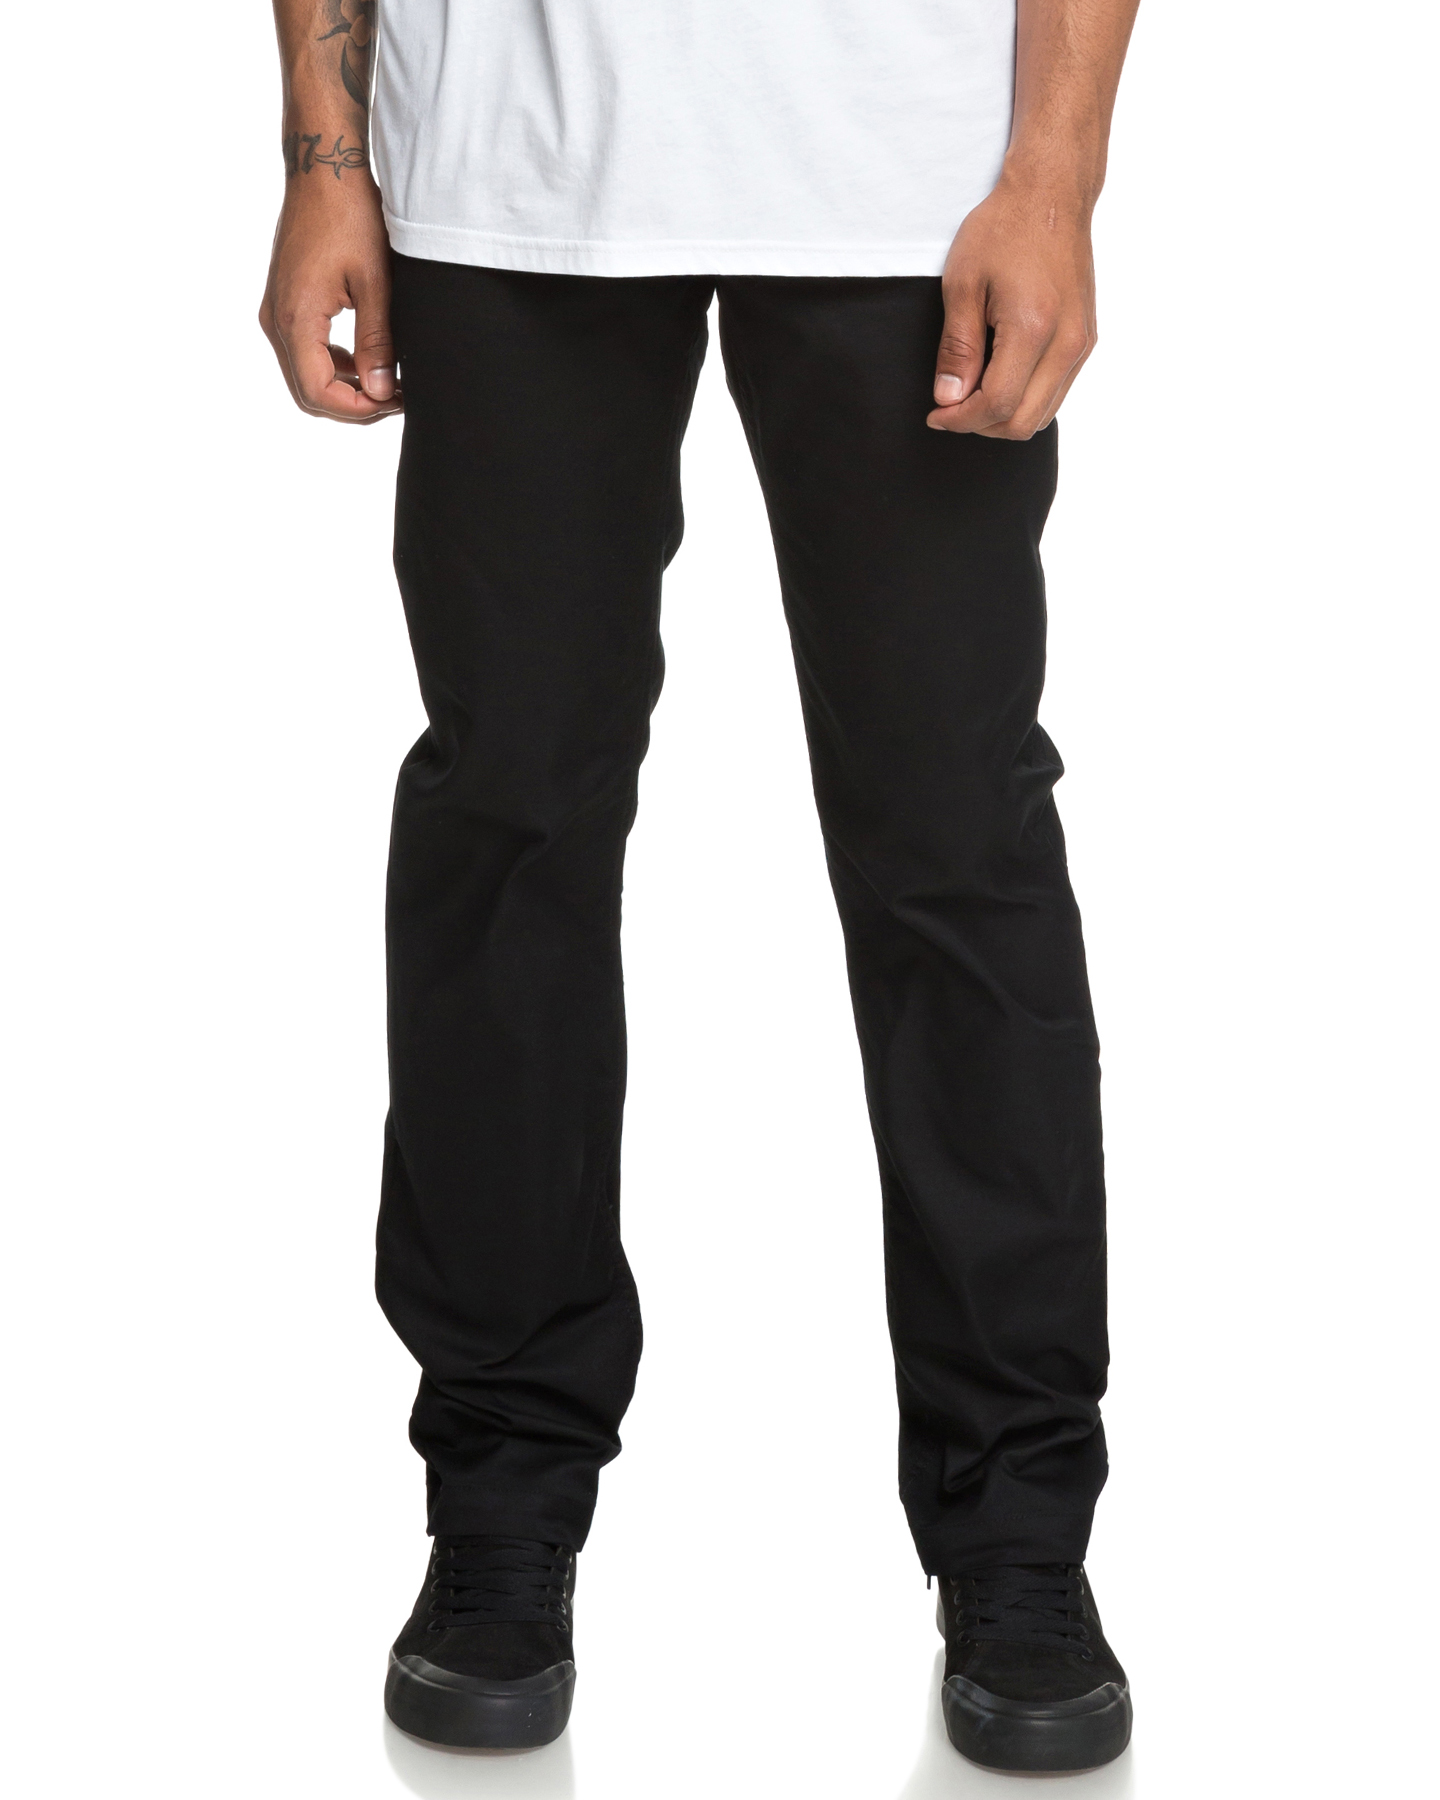 Dc Shoes Worker Straight Chino Pant 